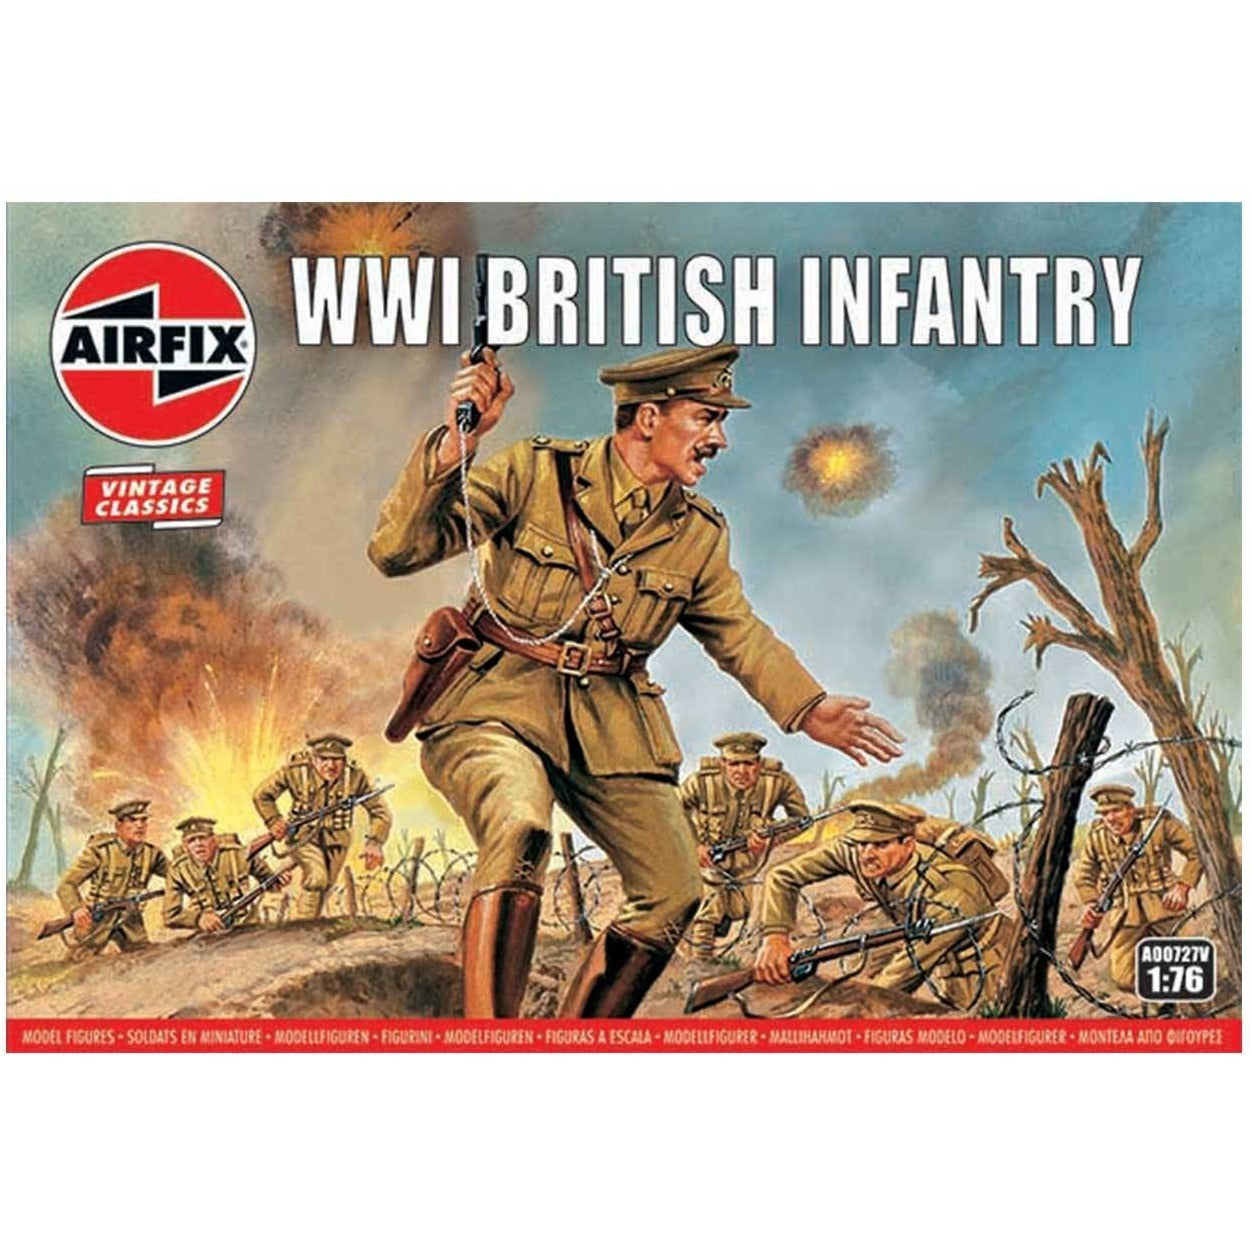 WWI British Infantry 1/76 by Airfix